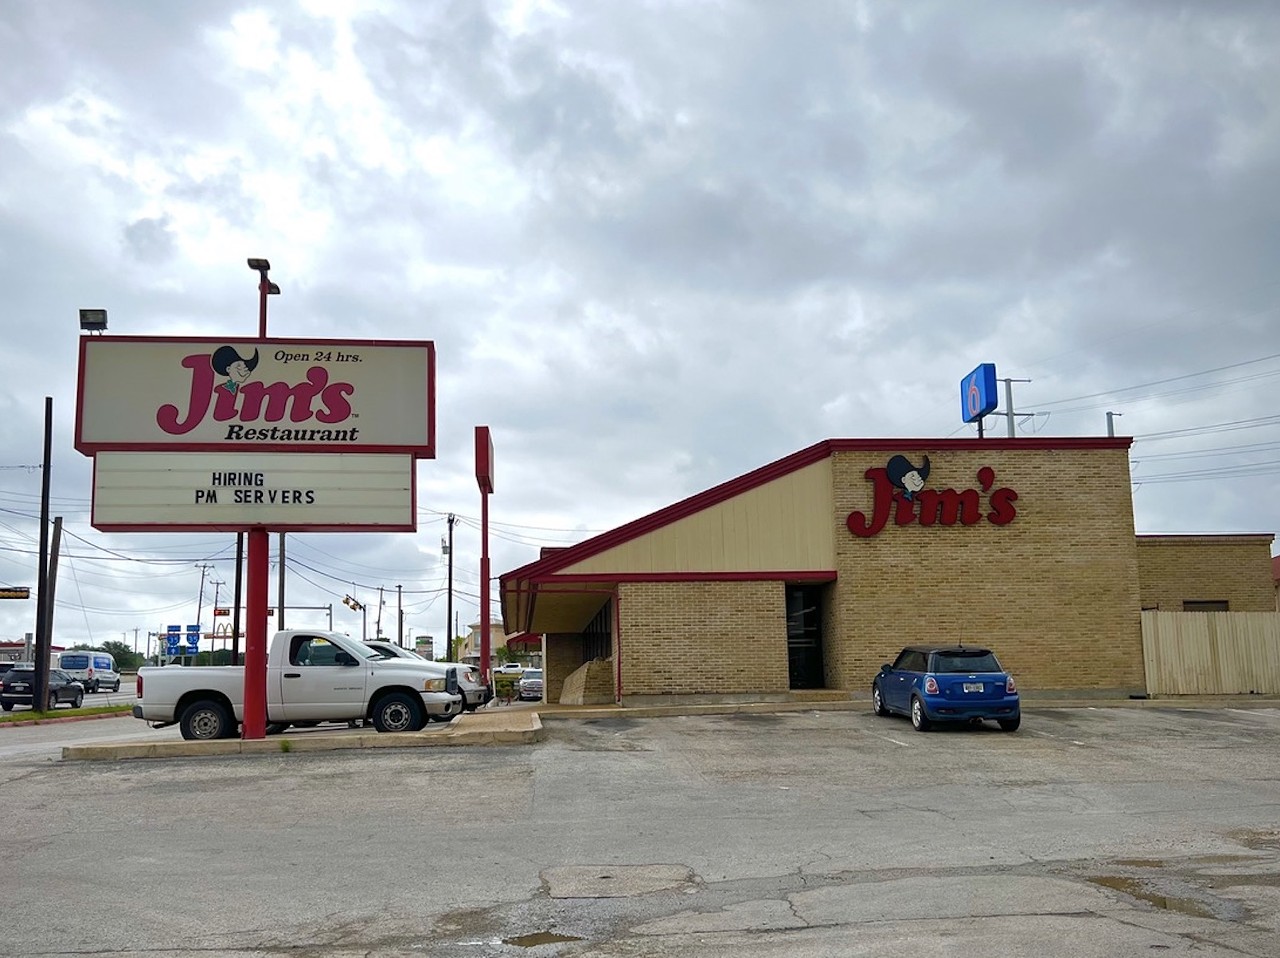 Jim’s Restaurants
Multiple Locations, jimsrestaurants.com
Specializing in American bites with some Mexican dishes on the menu, Jim’s is a San Antonio staple, with its headquarters in Alamo City. This dining chain’s tagline, “There’s Always Jim’s,” is a fitting slogan, as many of its locations are open 24/7.